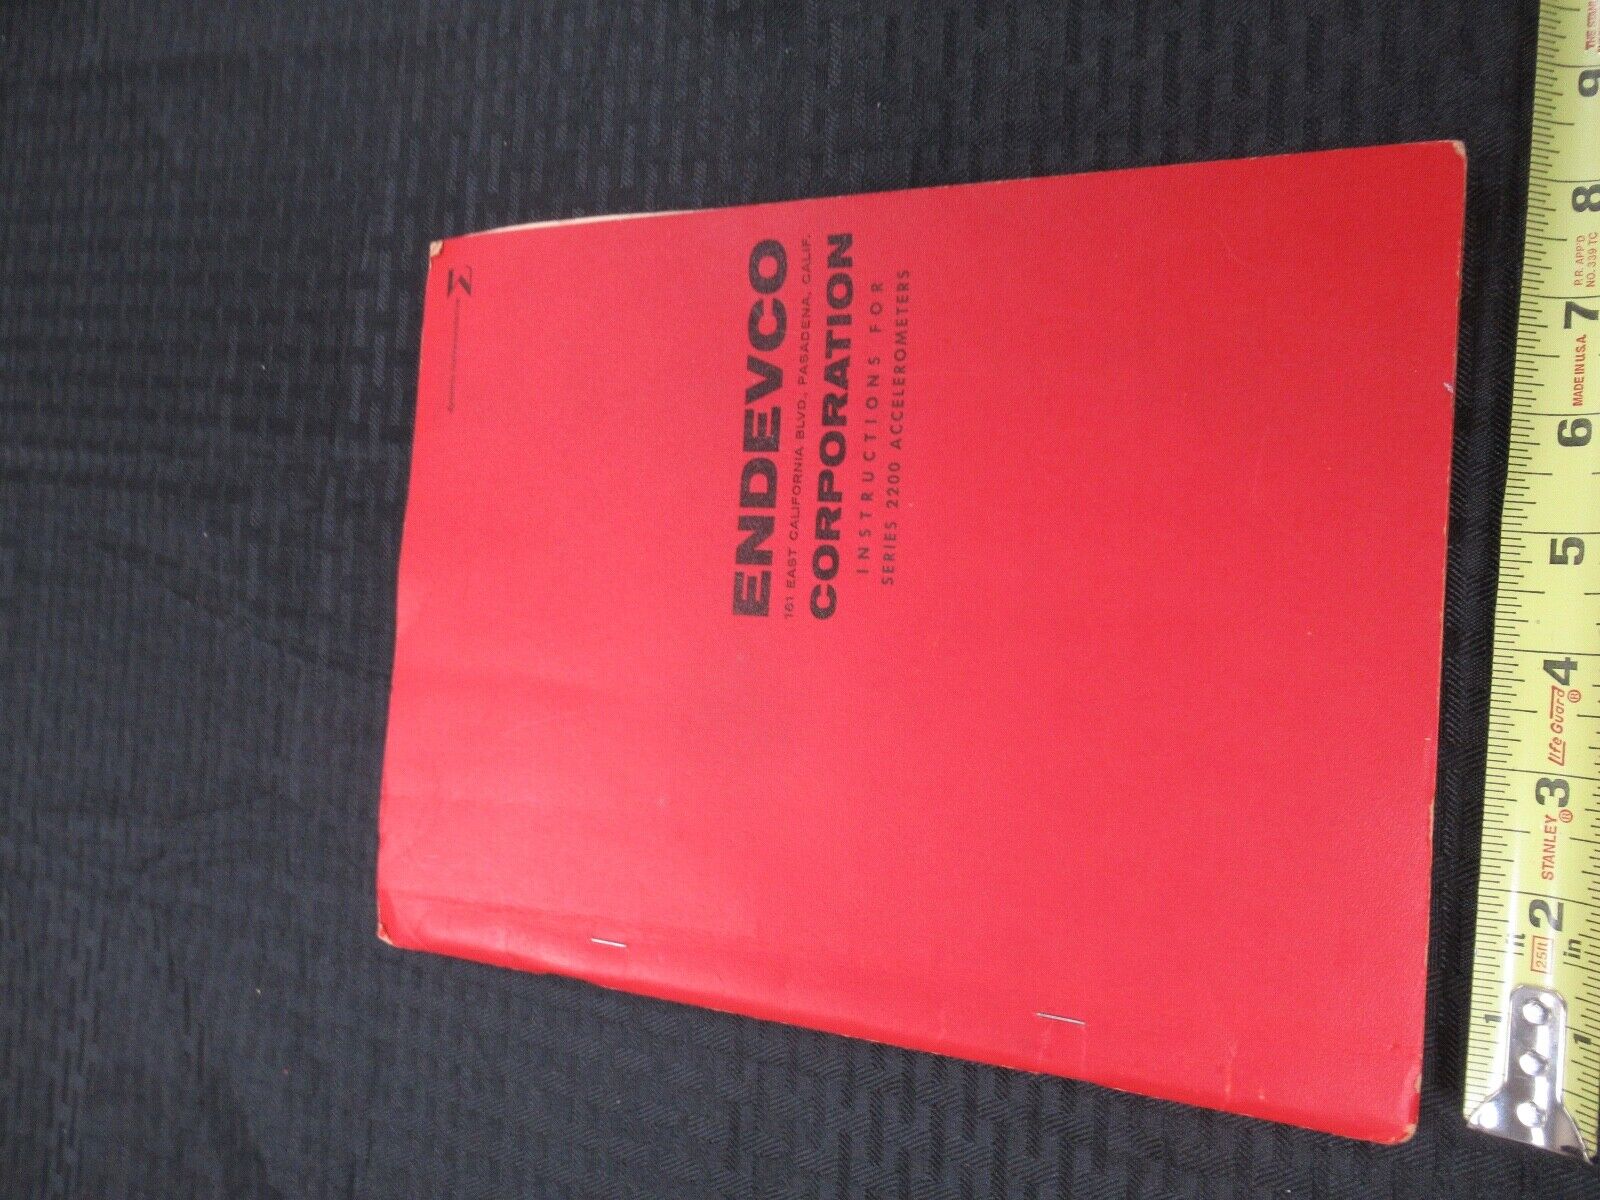 ENDEVCO VINTAGE INSTRUCTIONS MANUAL ACCELEROMETER 2200 AS PICTURED &50-FT-06